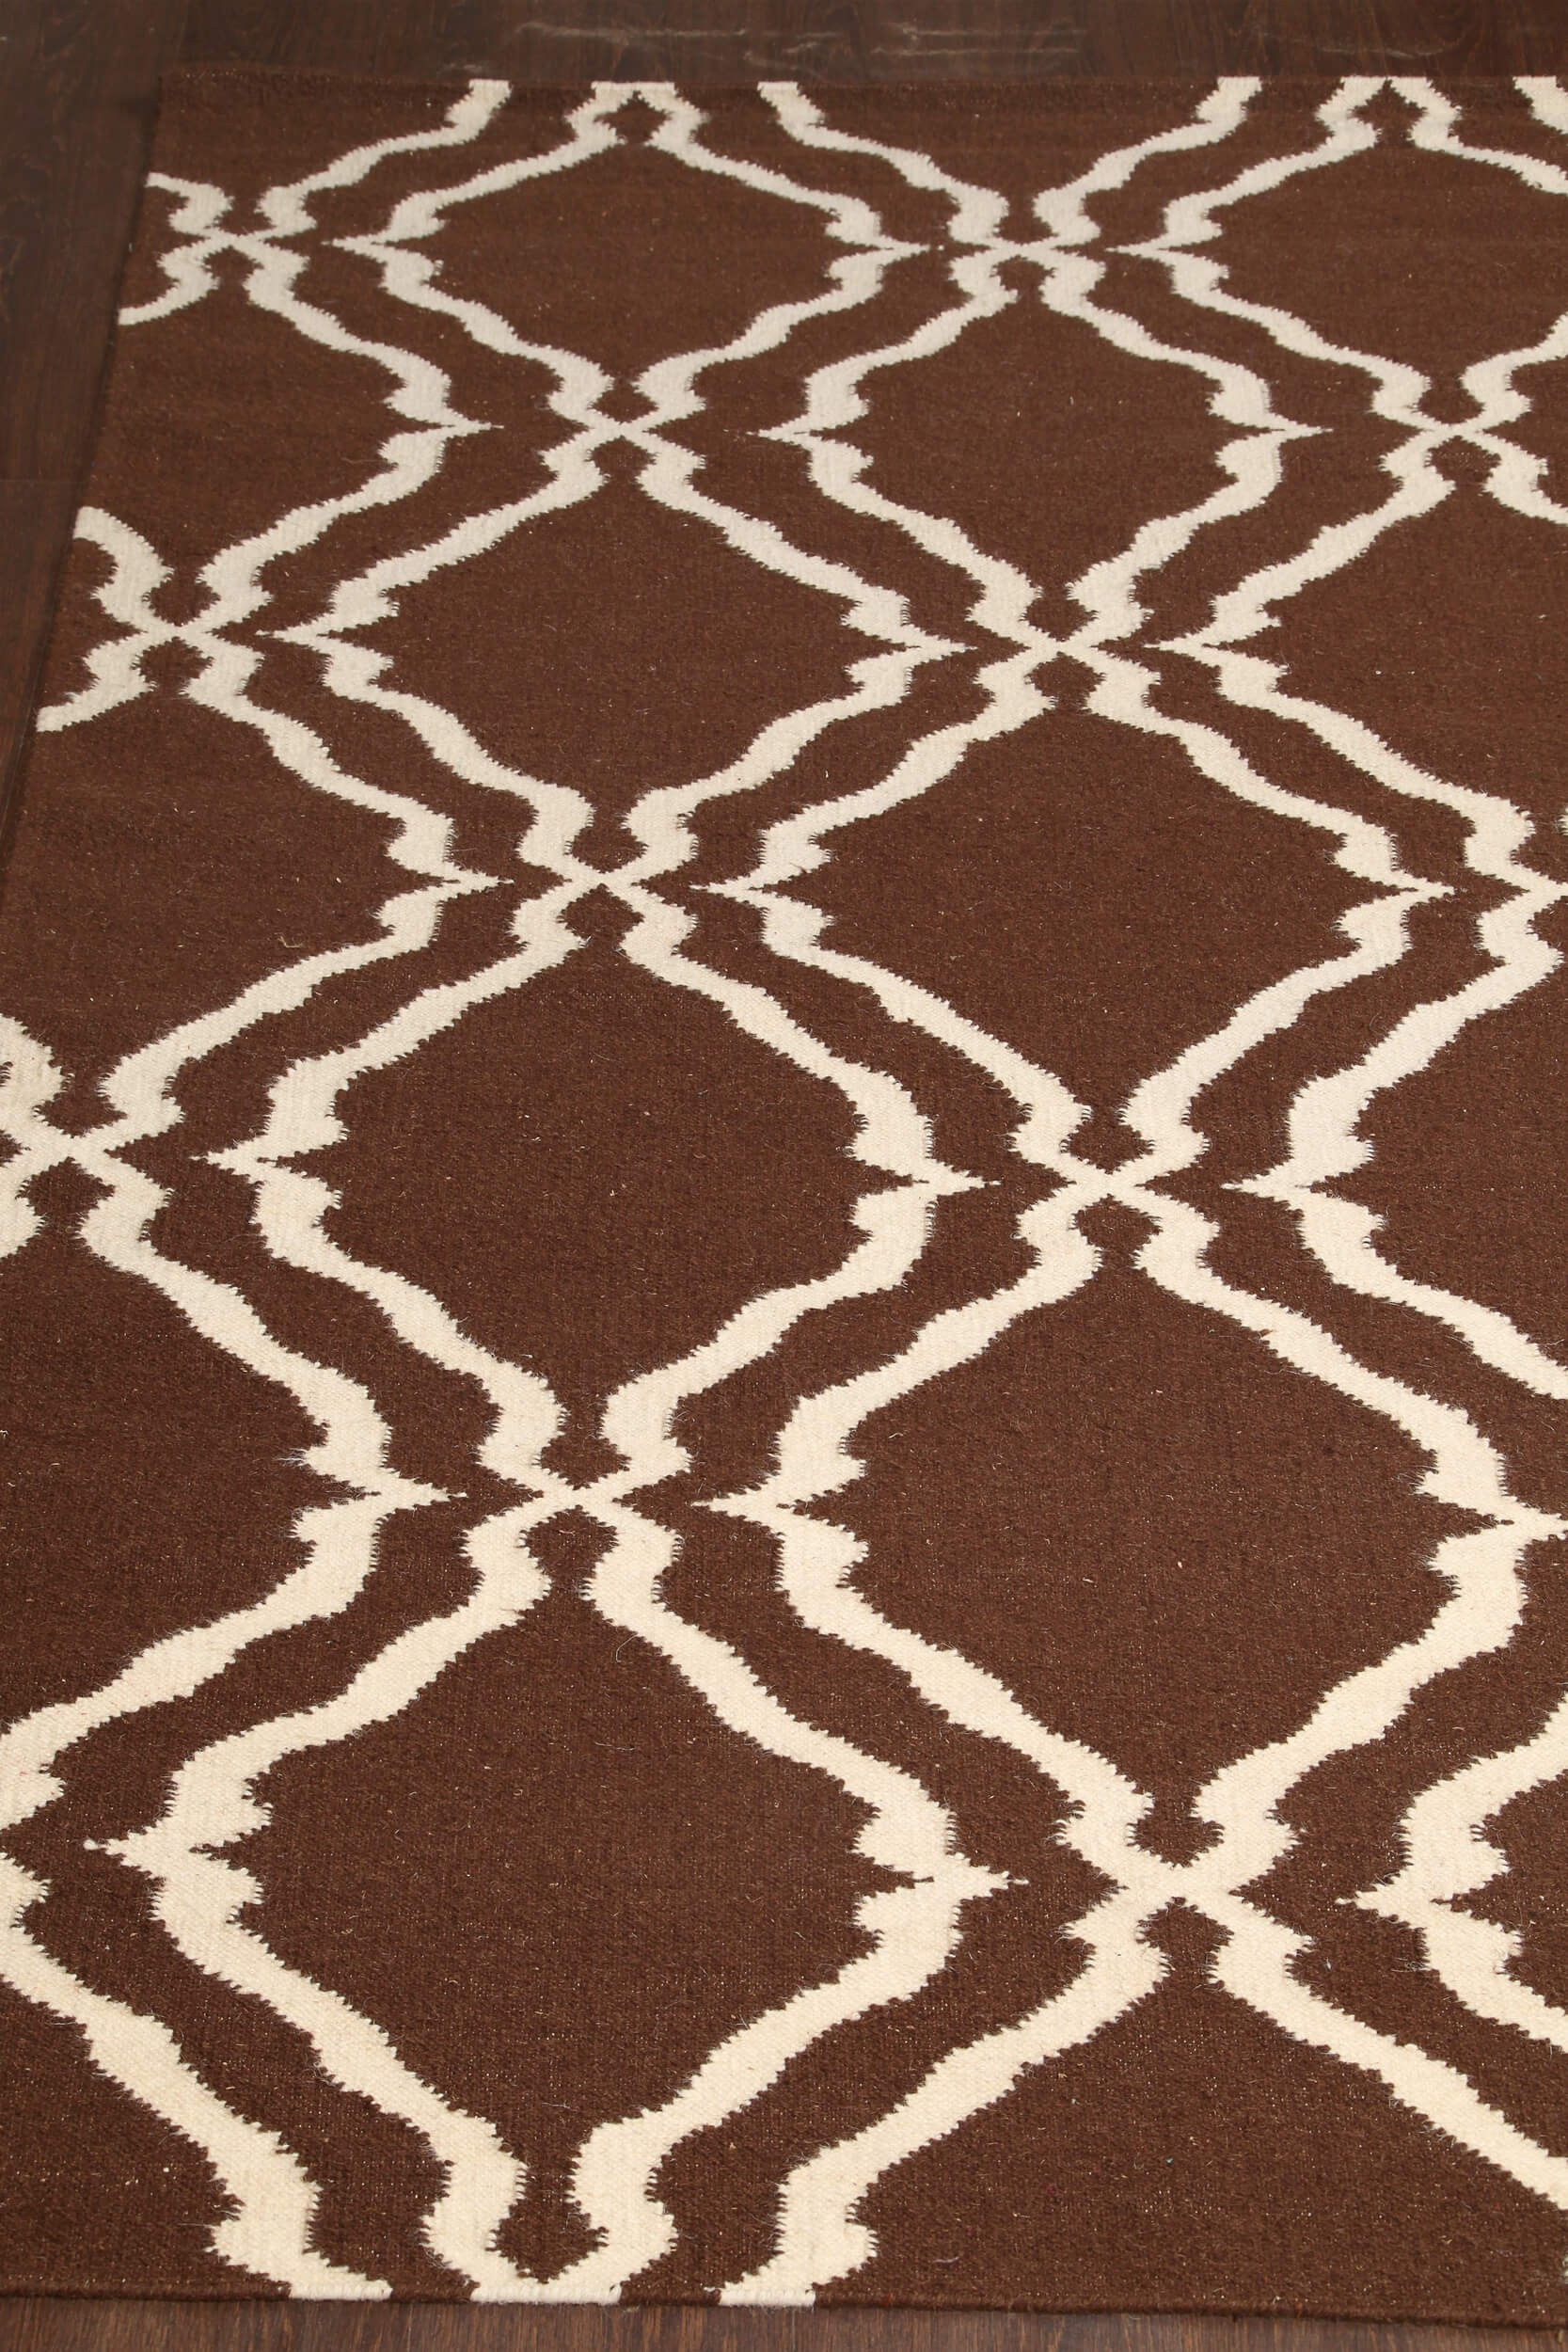 5X8 Rug In Living Room
 Rugs Appealing Smooth 5x8 Rugs For Living Room